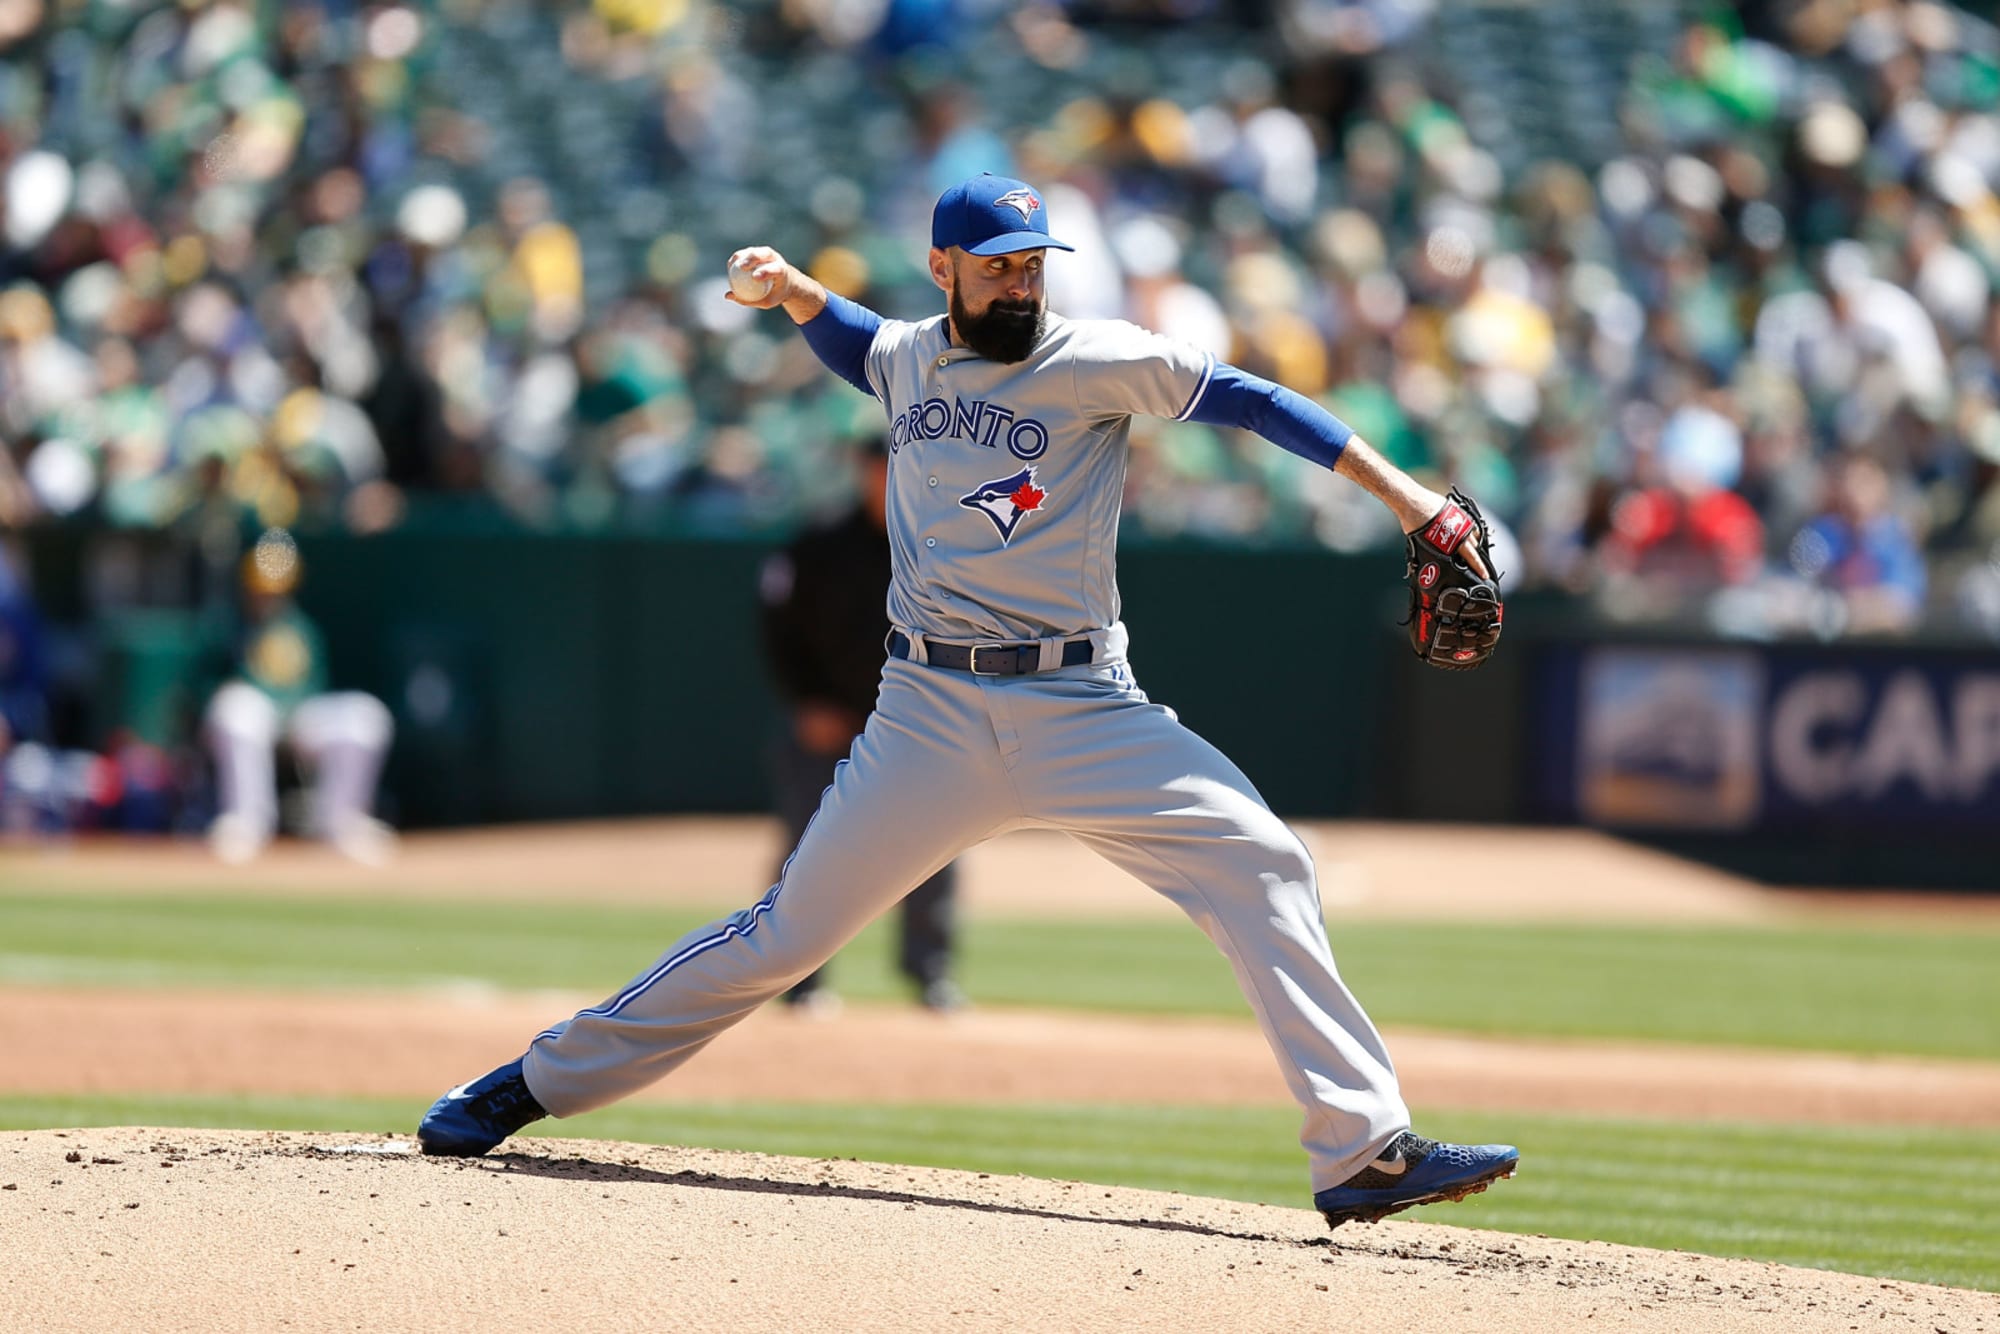 Toronto Blue Jays starting rotation has potential to return to dominant